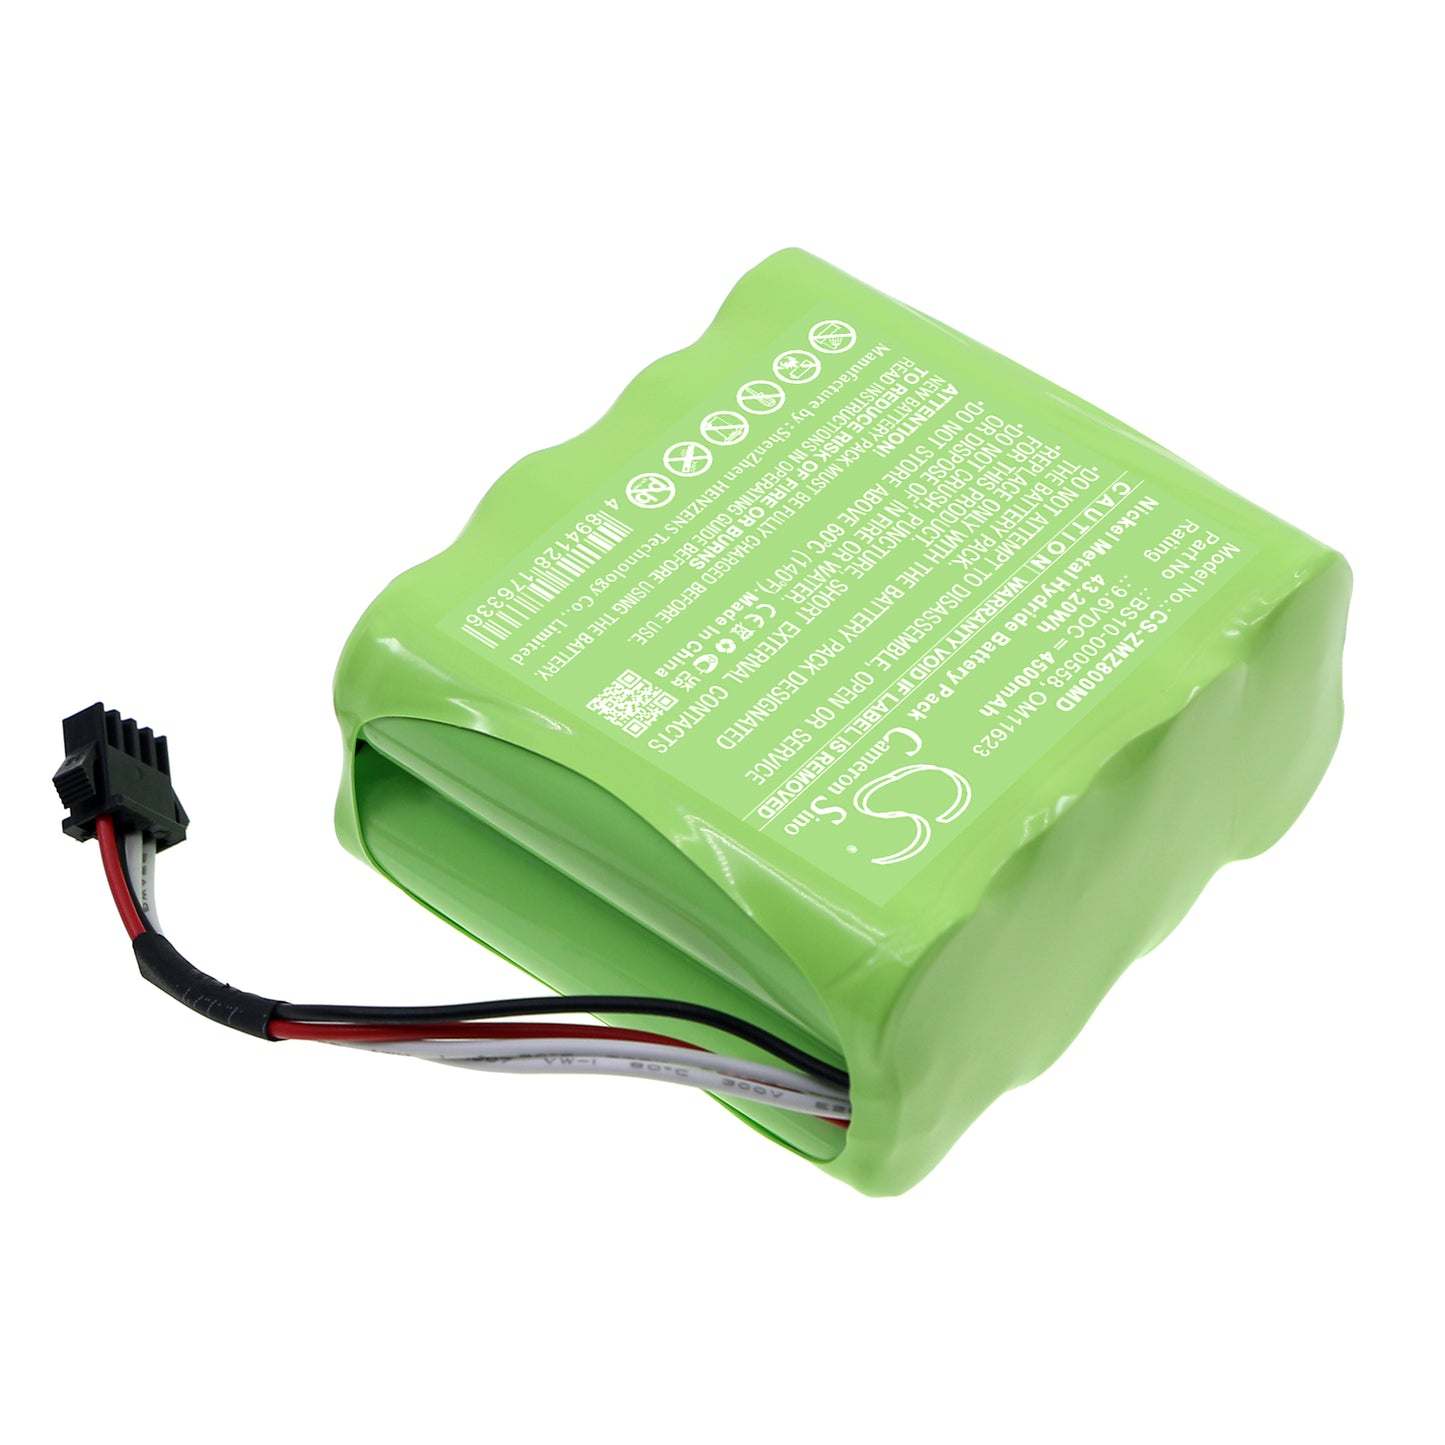 4500mAh BS10-000558, OM11623 Battery for Zyno Medical Z-800 Infusion Pump-SMAVtronics